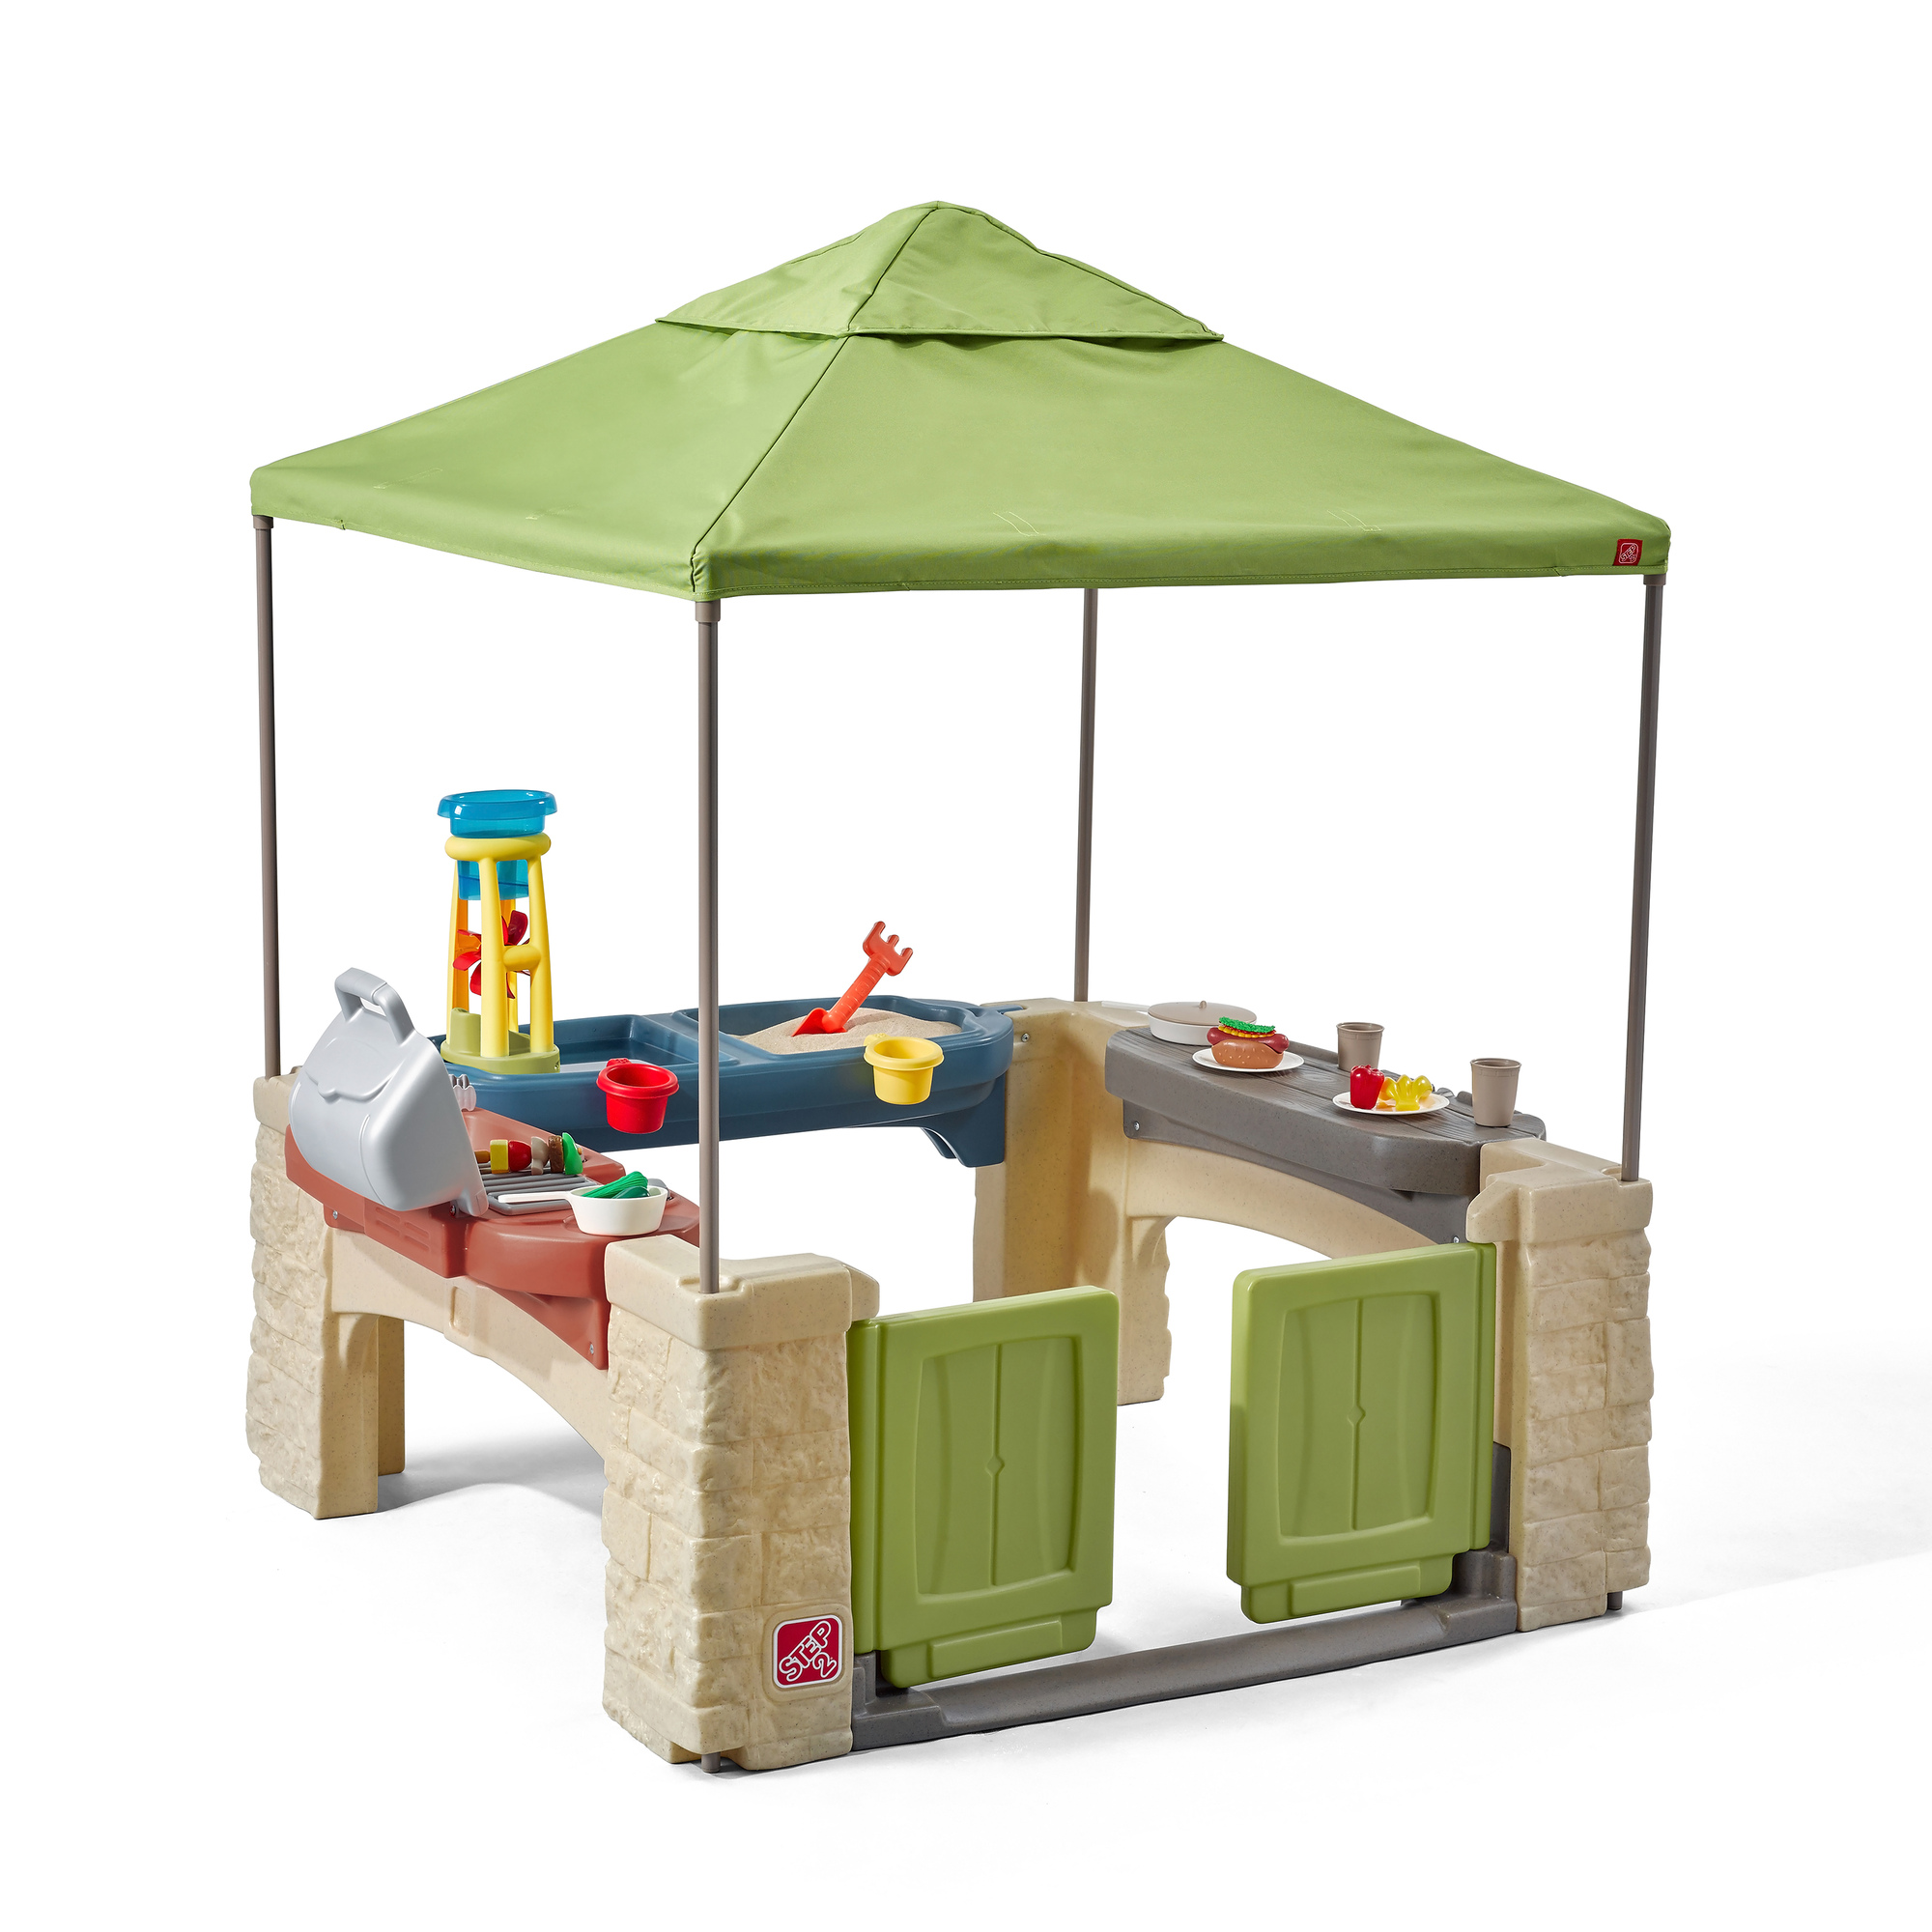 Step2 All-Around Playtime Patio with Canopy with 16 Play Accessories Playhouse Kids Outdoor Toys - image 1 of 21